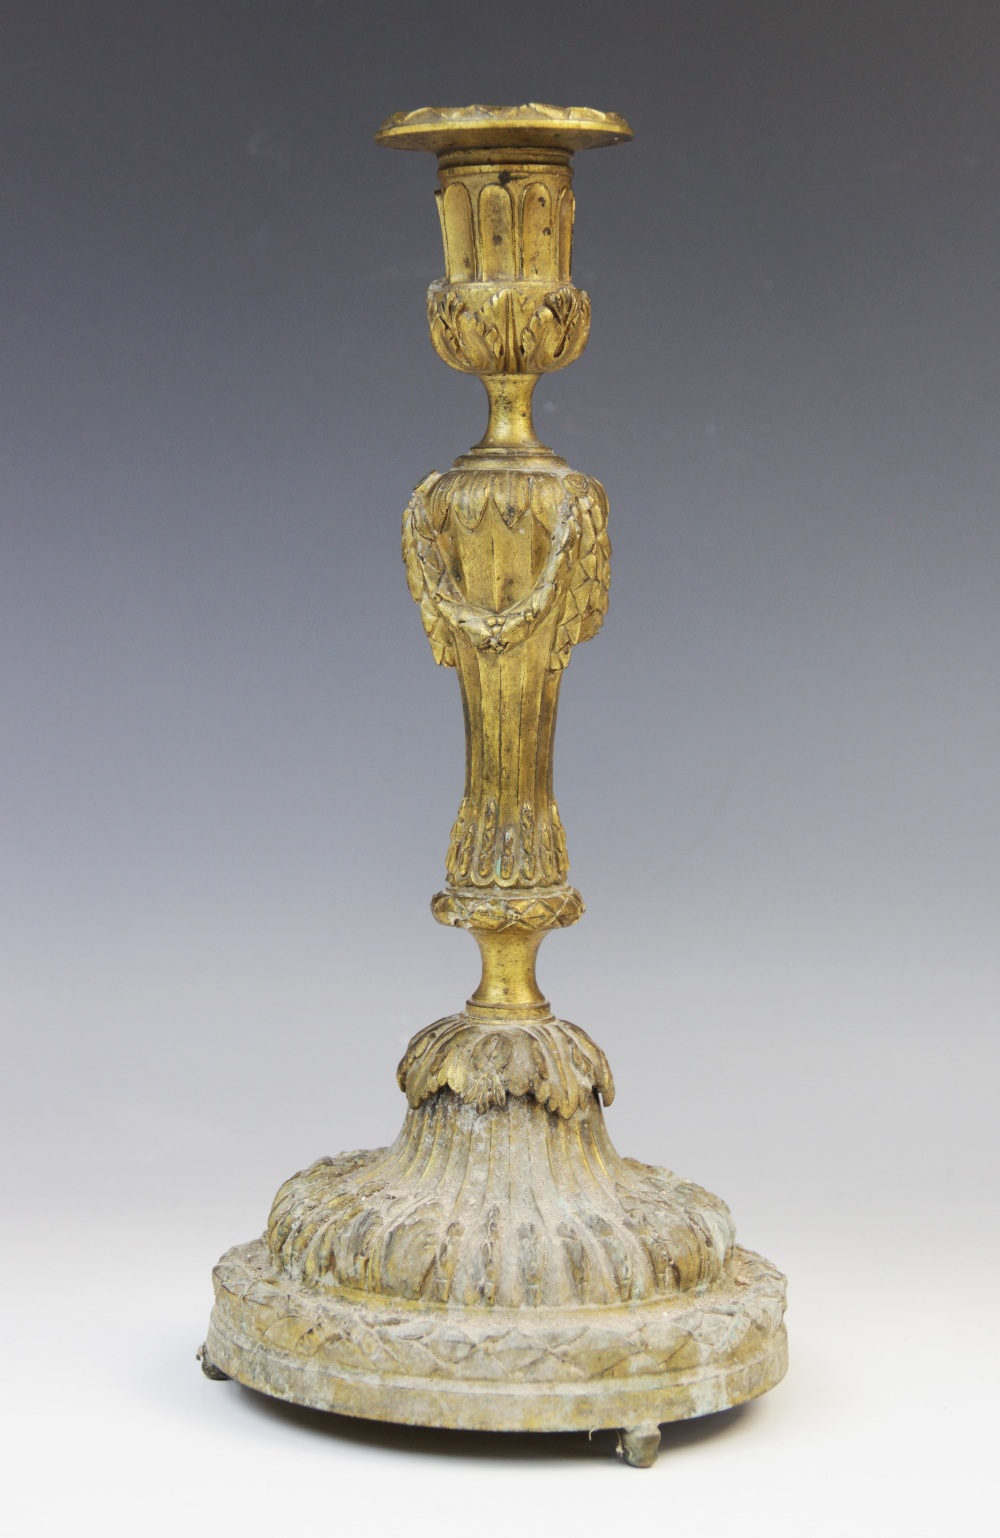 A Louis XVI style ormolu candlestick, early 19th century circa 1820, the flared sconce with